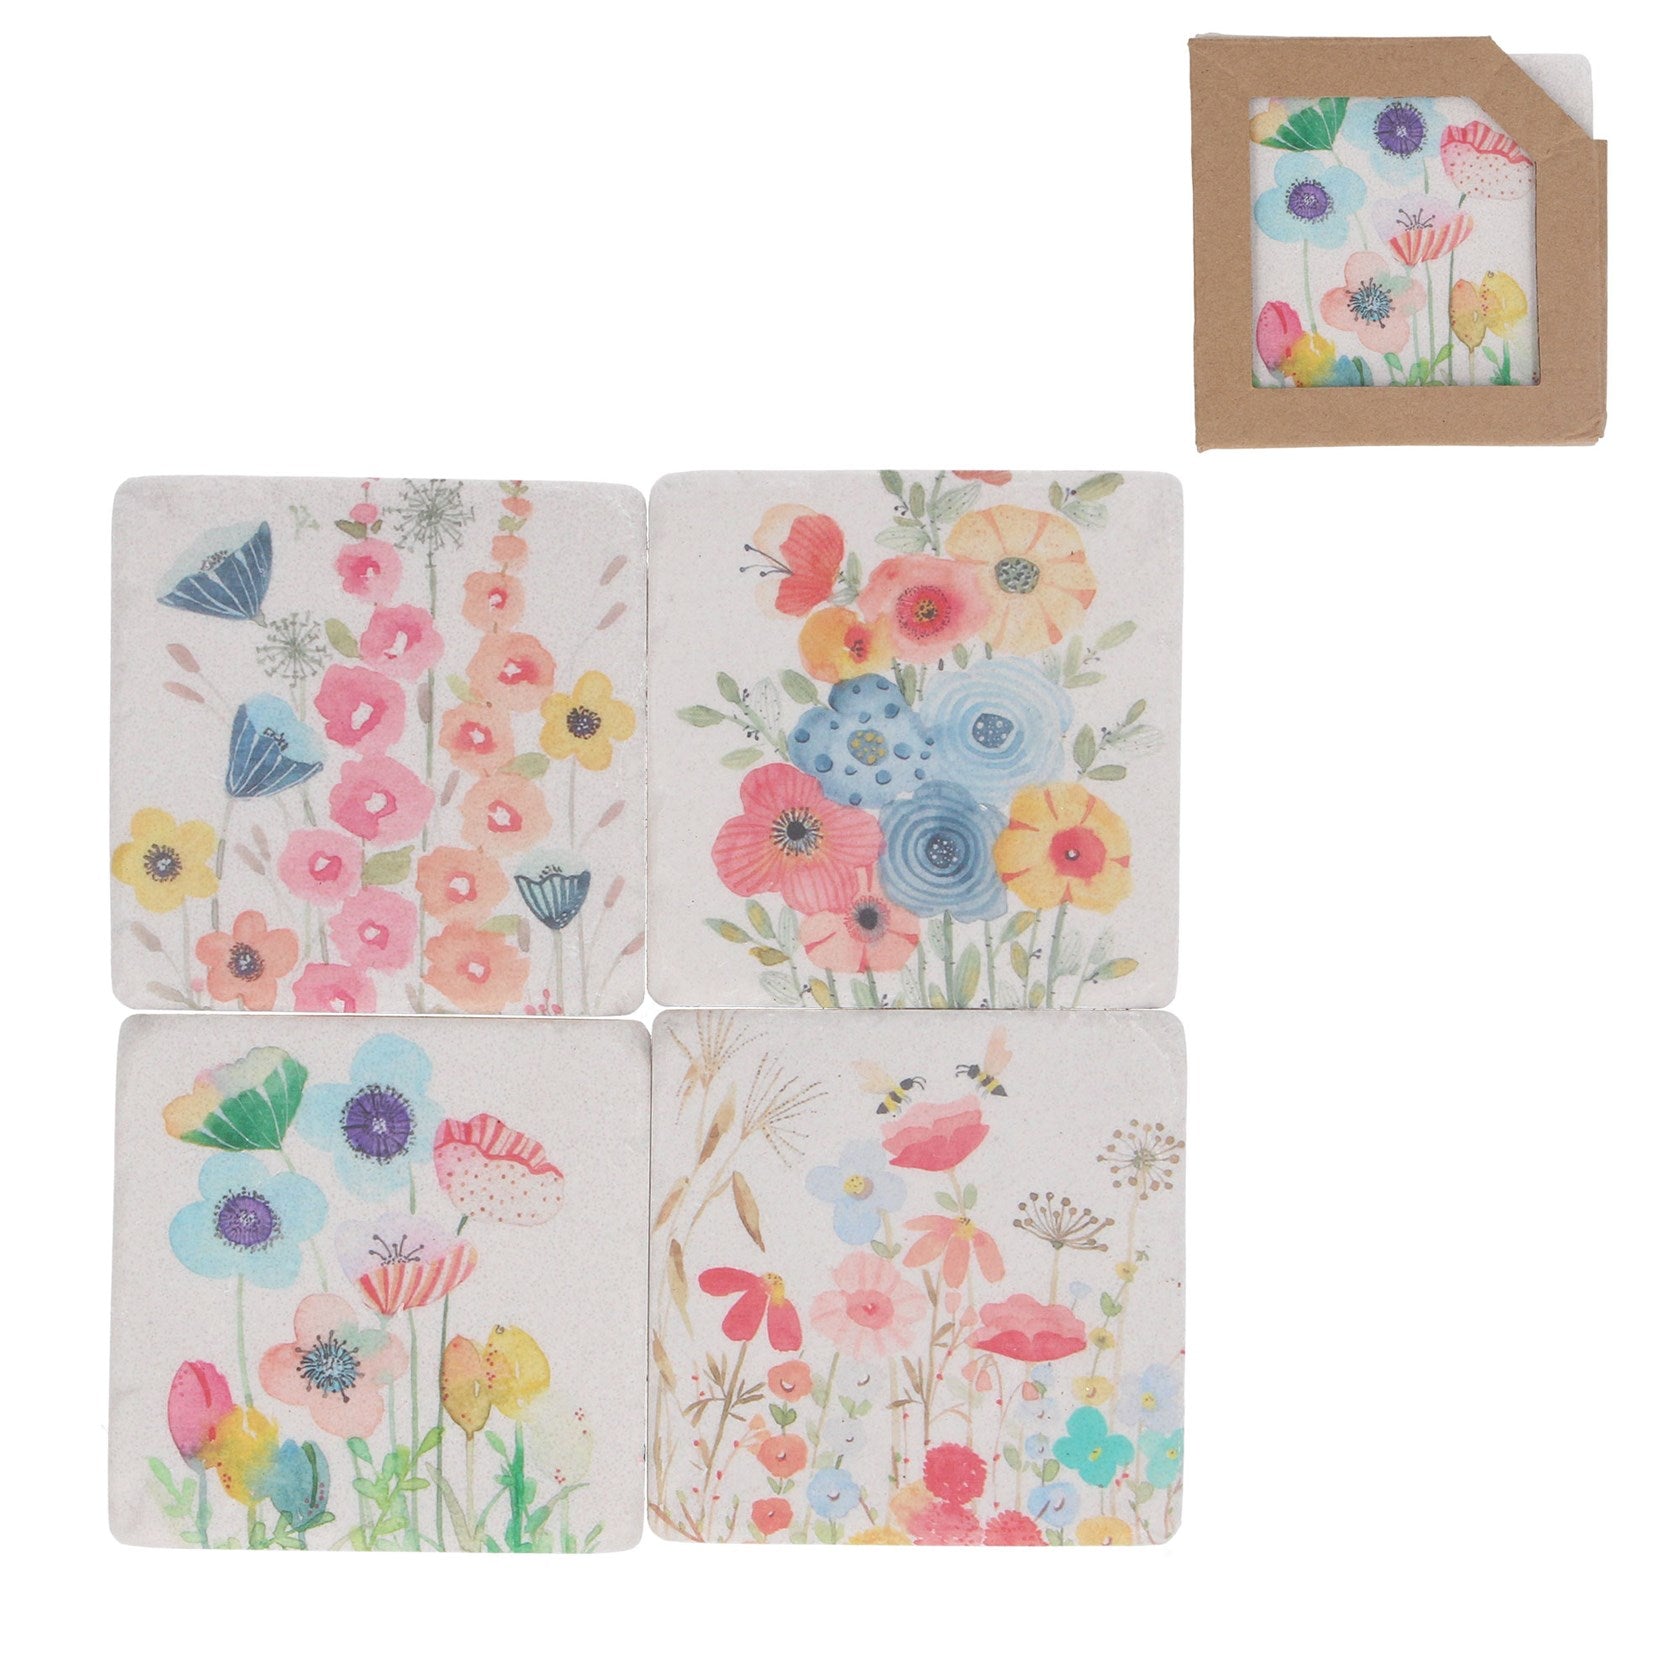 4 Resin Coasters - Whimsy Blooms